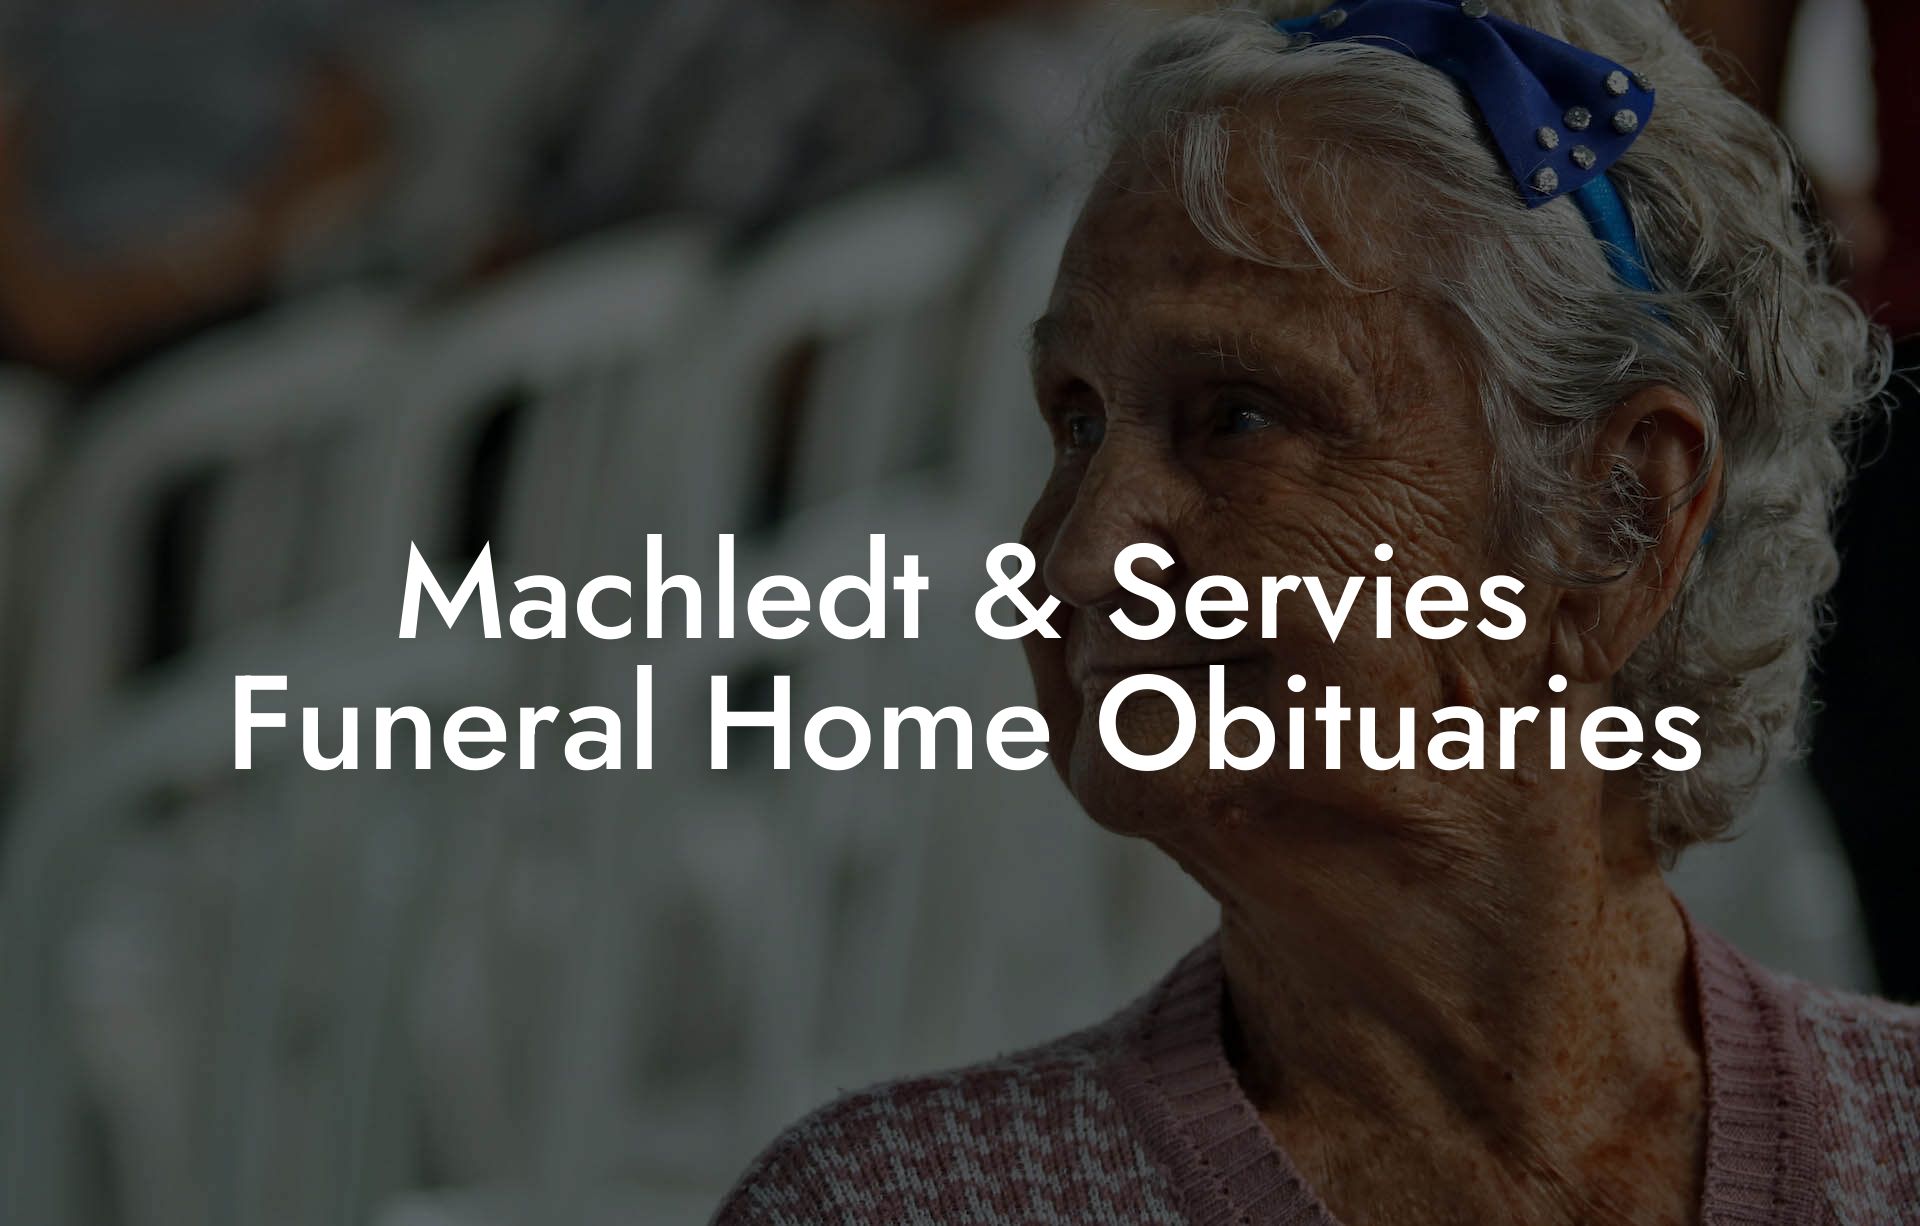 Machledt & Servies Funeral Home Obituaries